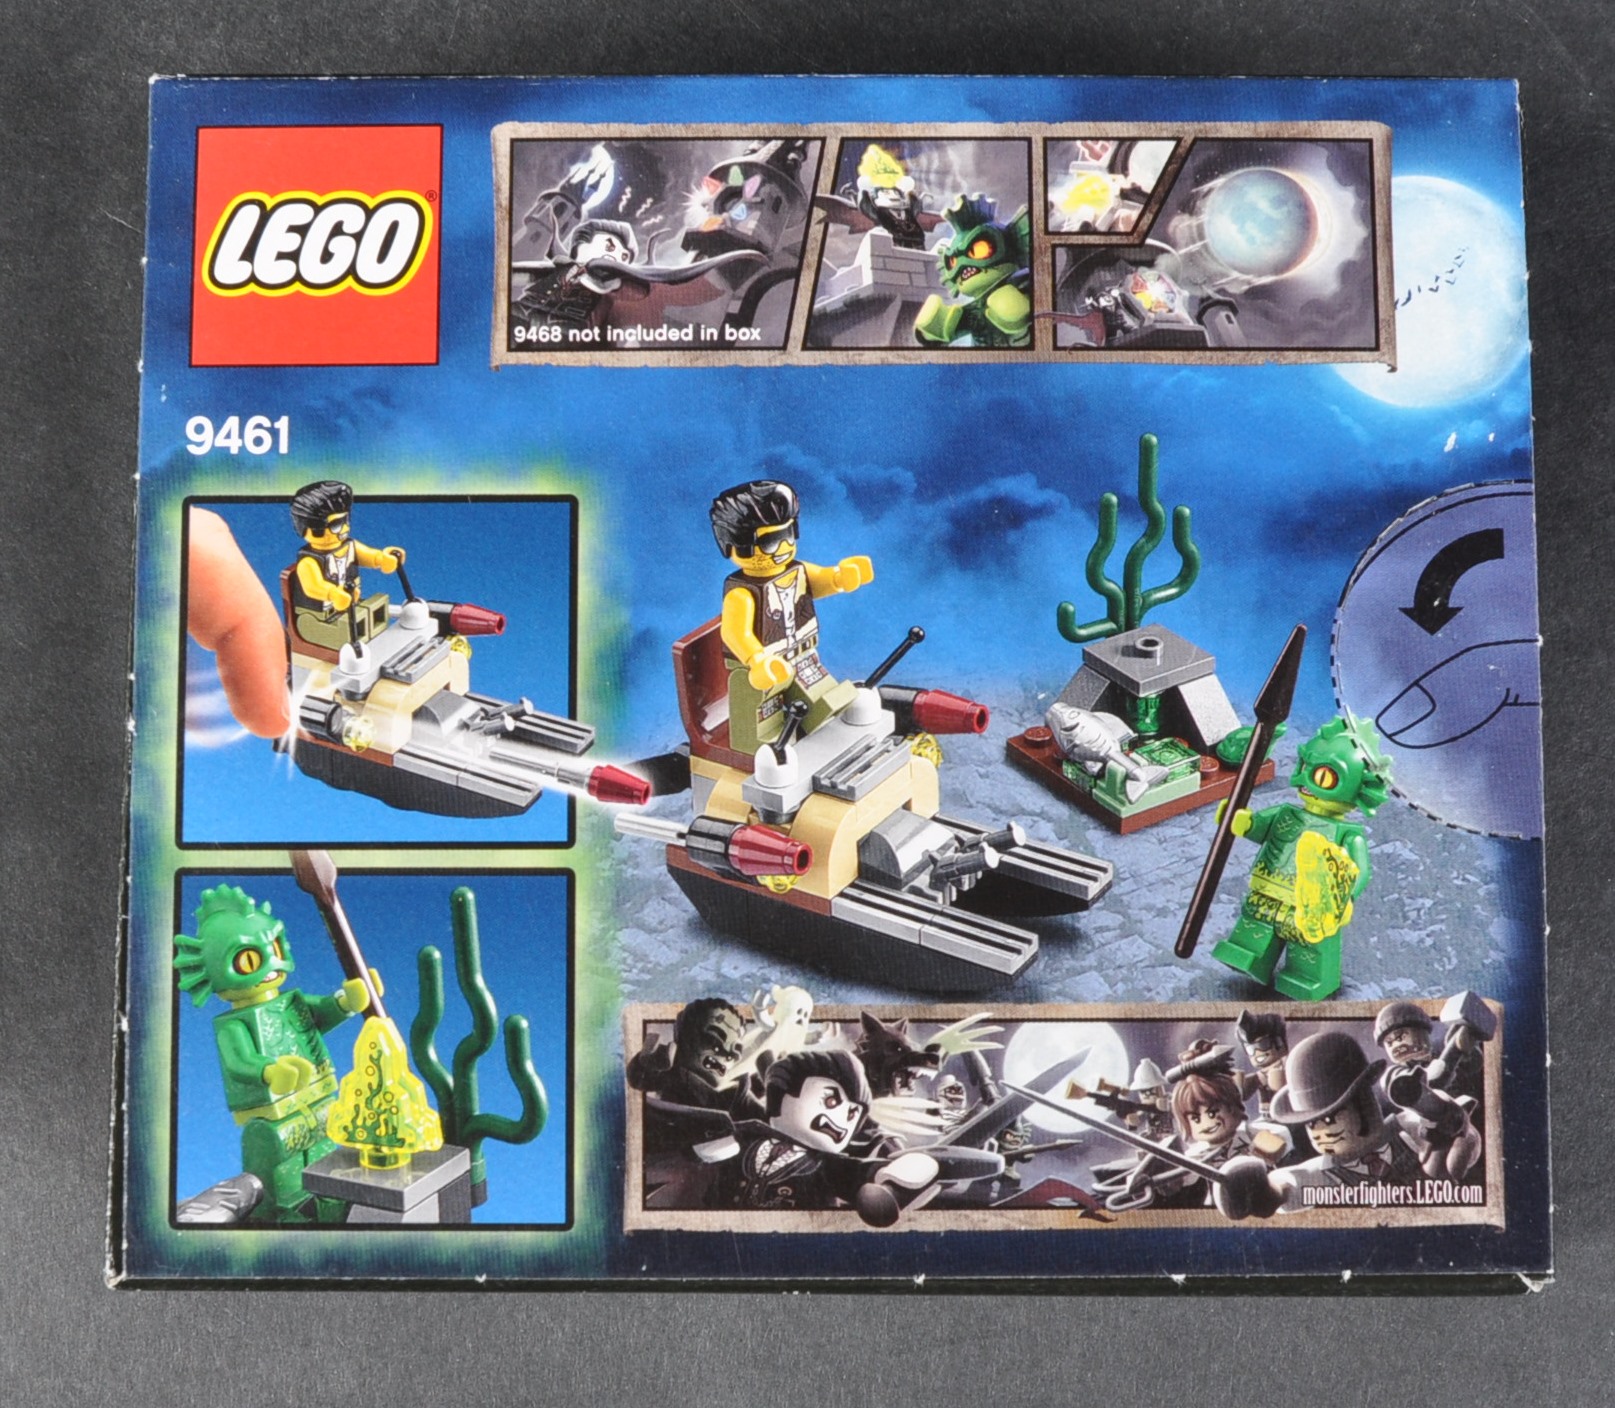 LEGO SETS - MONSTER FIGHTERS - 9461 - THE SWAMP CREATURE - Image 9 of 10